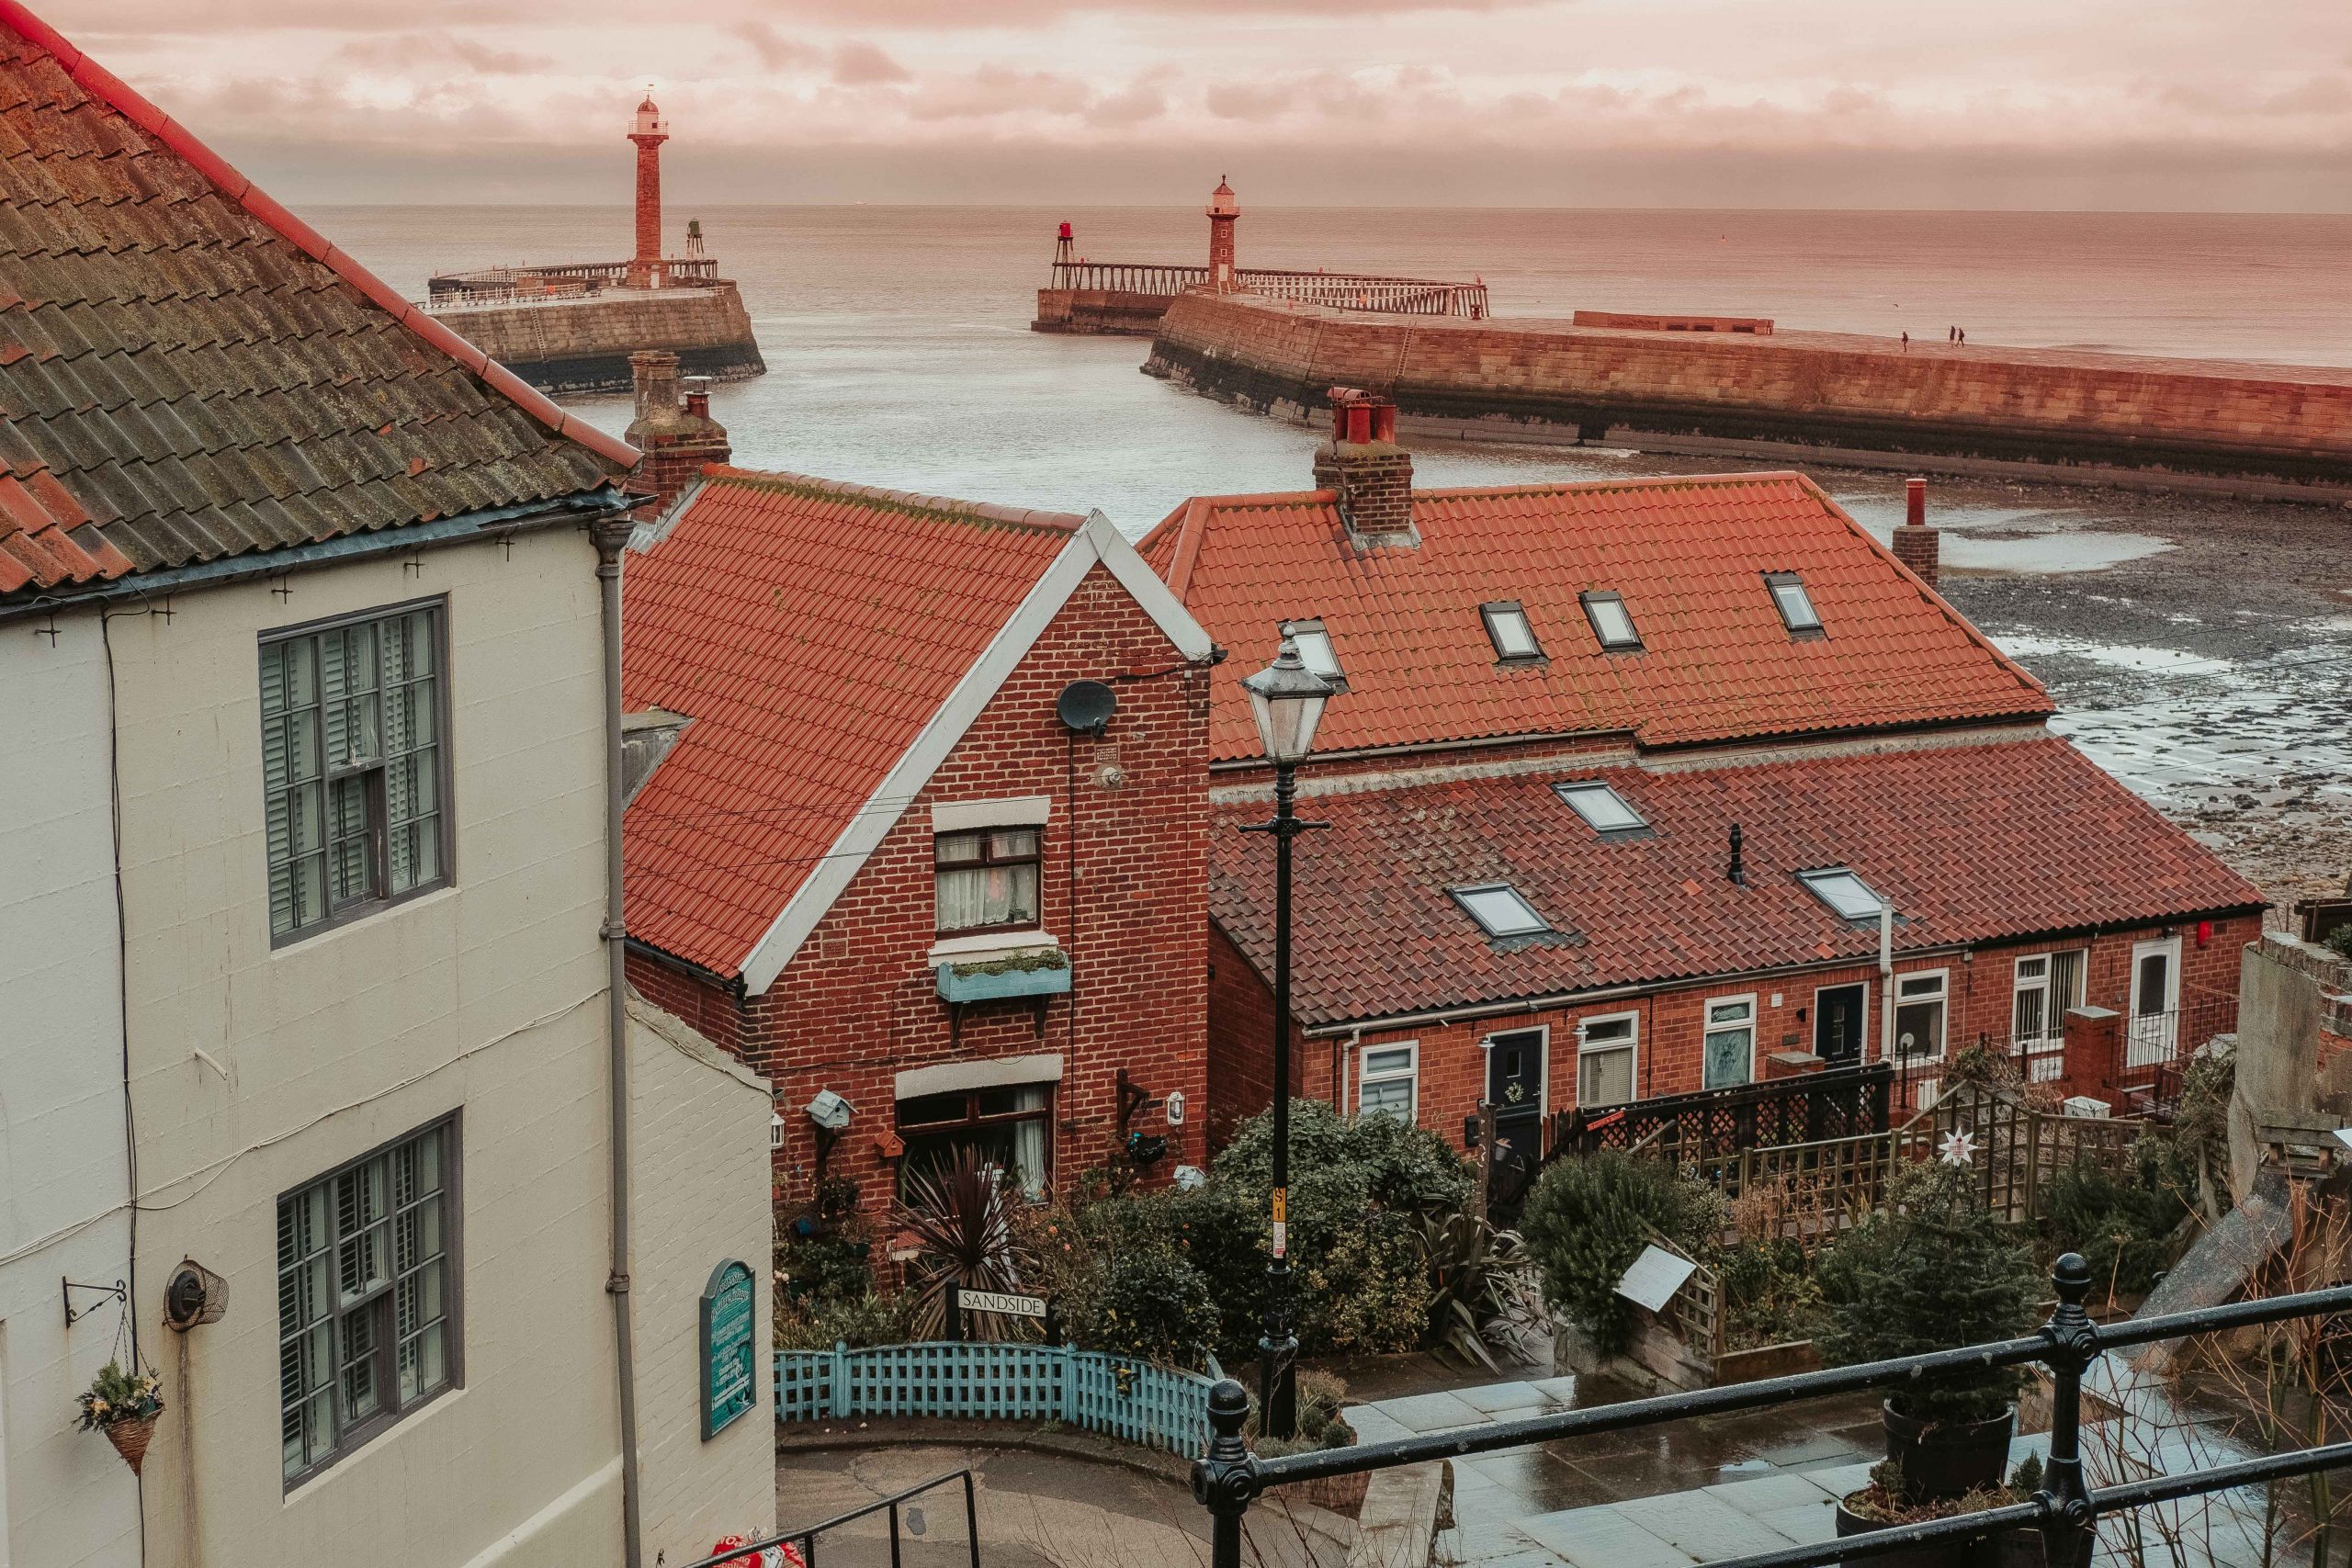 Whitby Harbour with its piers